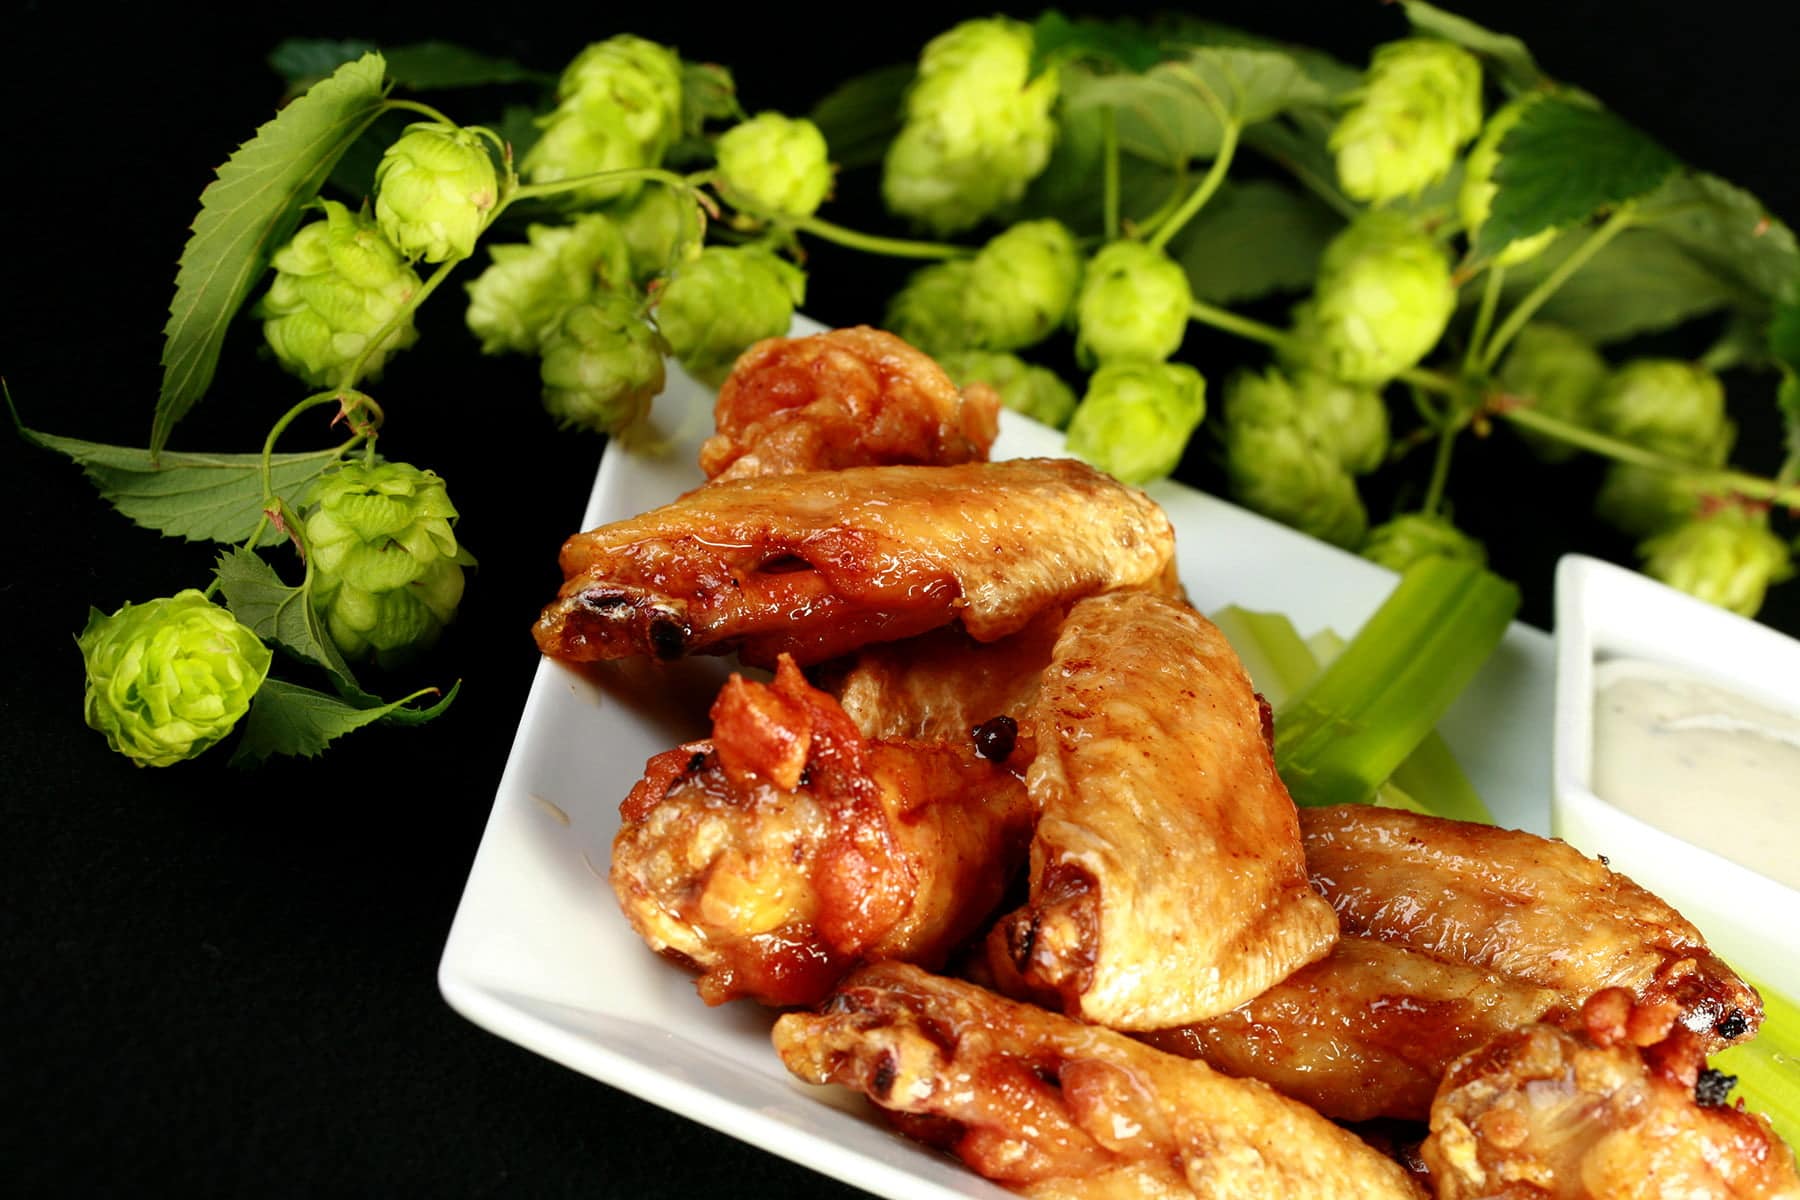 A plate of deep fried, Hoppy Citrus IPA Glazed Wings. They;re on a plate with celery sticks and a little bowl of ranch sauce, and the plate is surrounded by fresh hop bines.